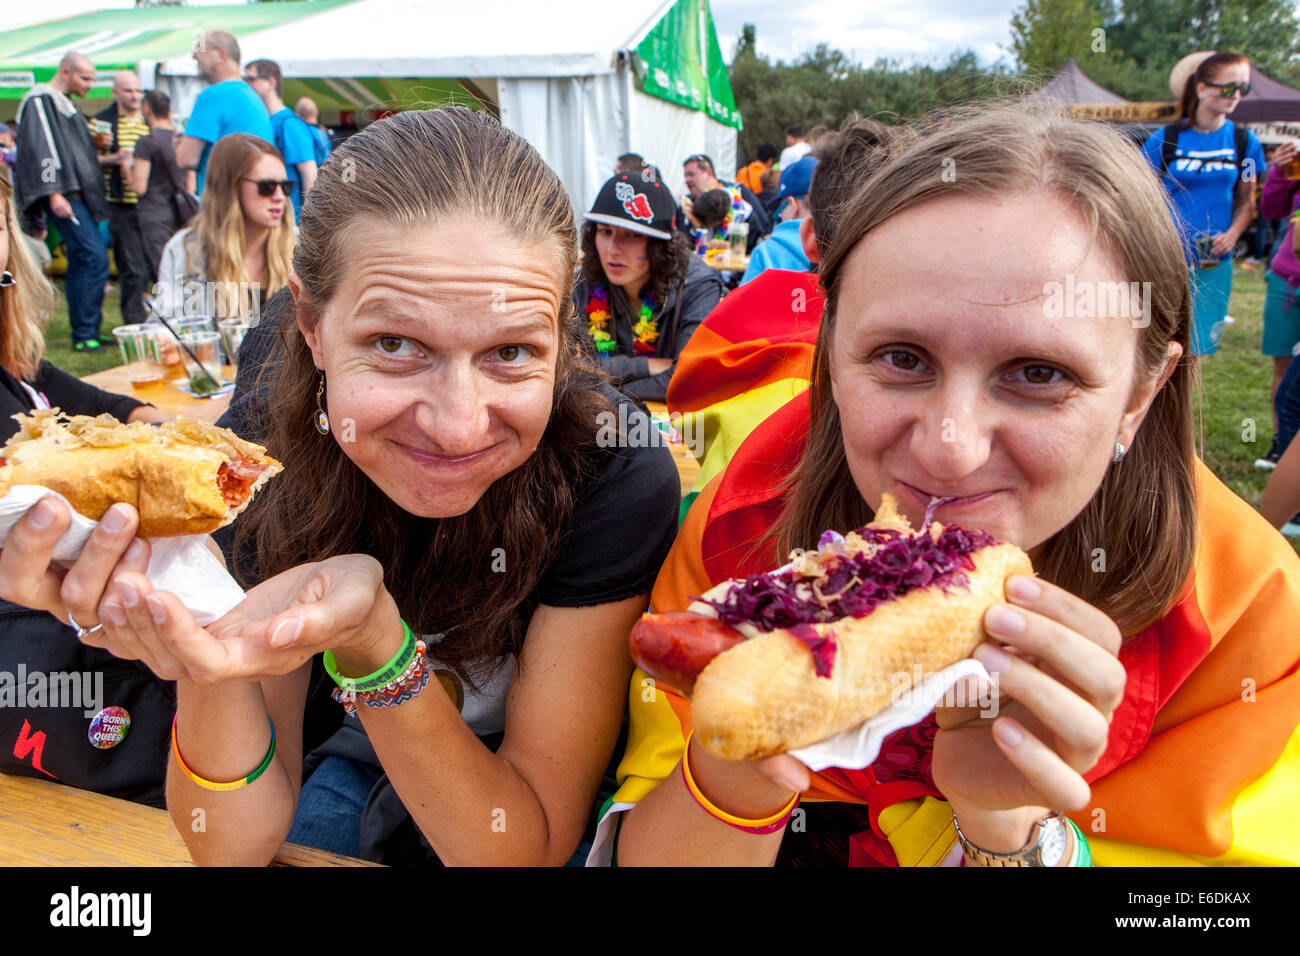 Two girls eat Hotdogs from fast food, sausage in a bun with mustard, People eating food Prague Letna Park, Czech Republic unhealthy eating Stock Photo